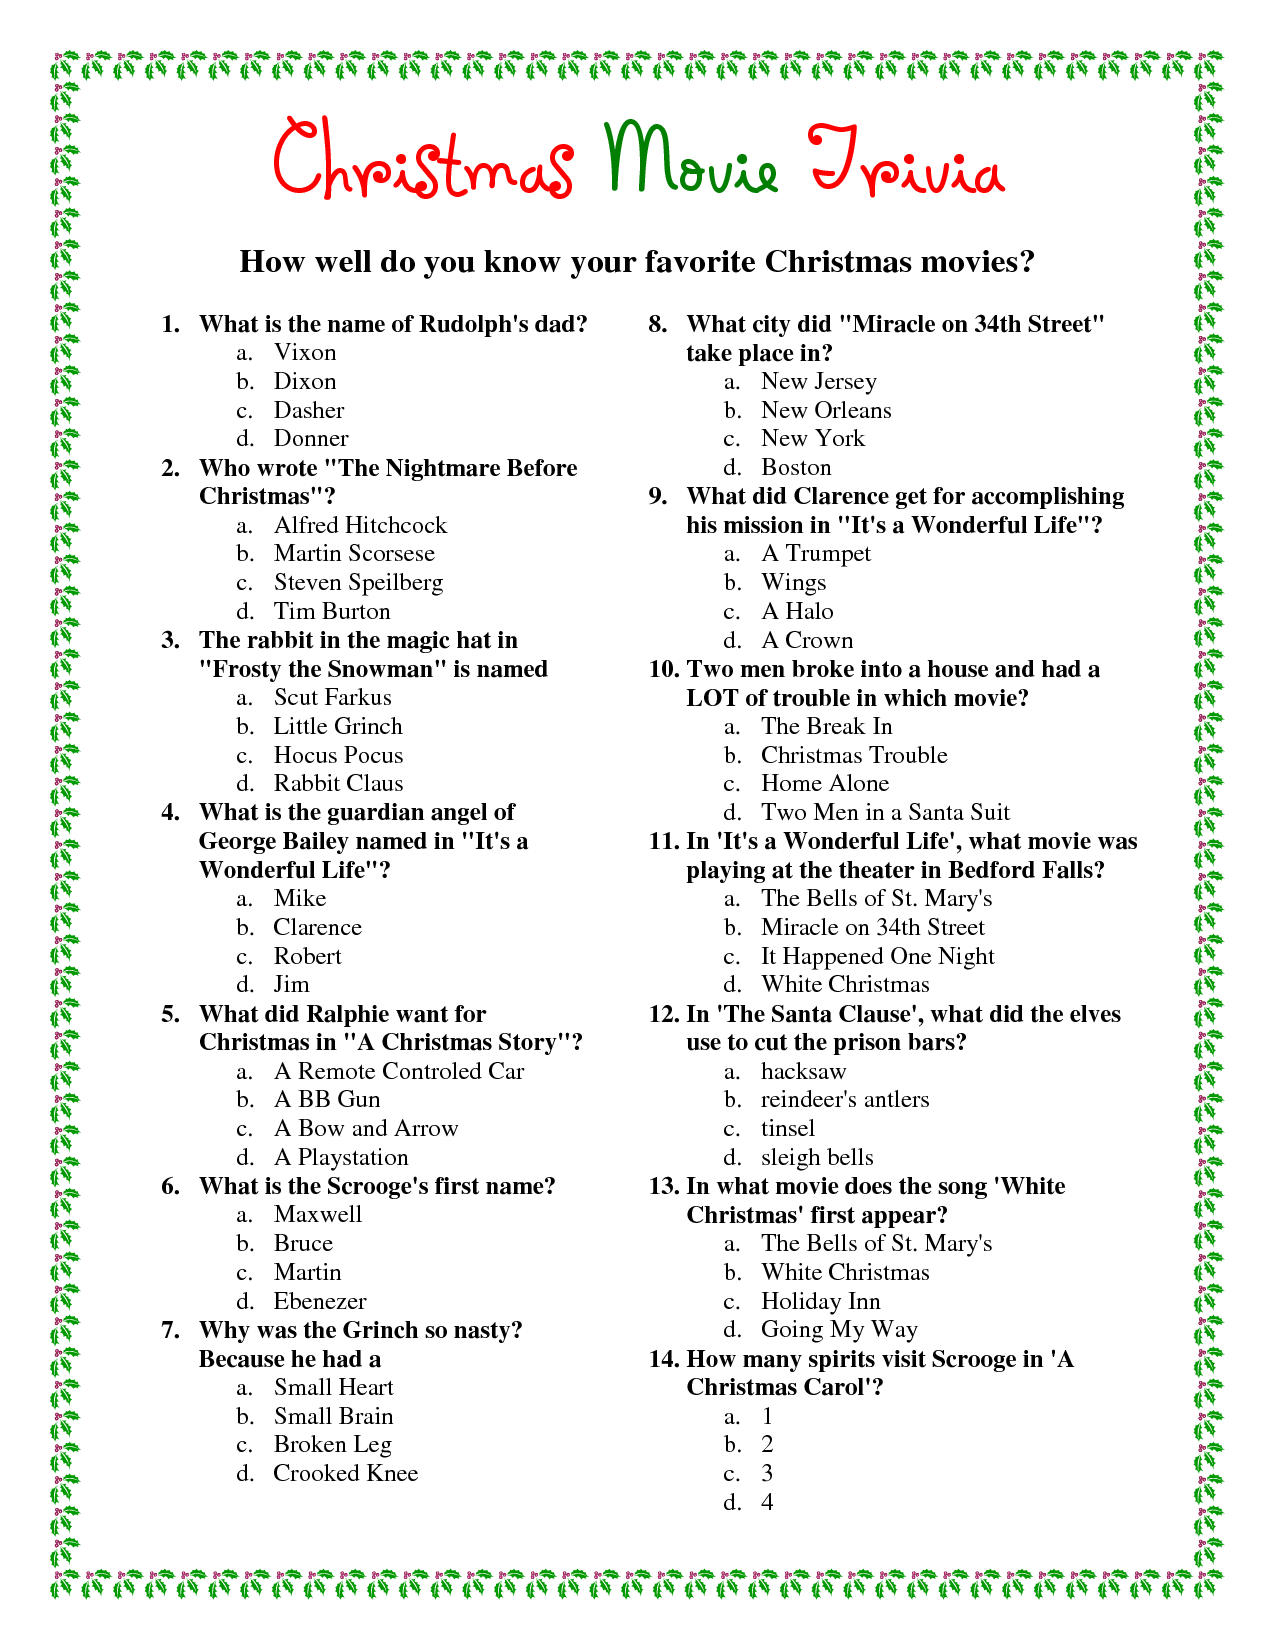 printable-trivia-questions-for-seniors-to-download-and-print-the